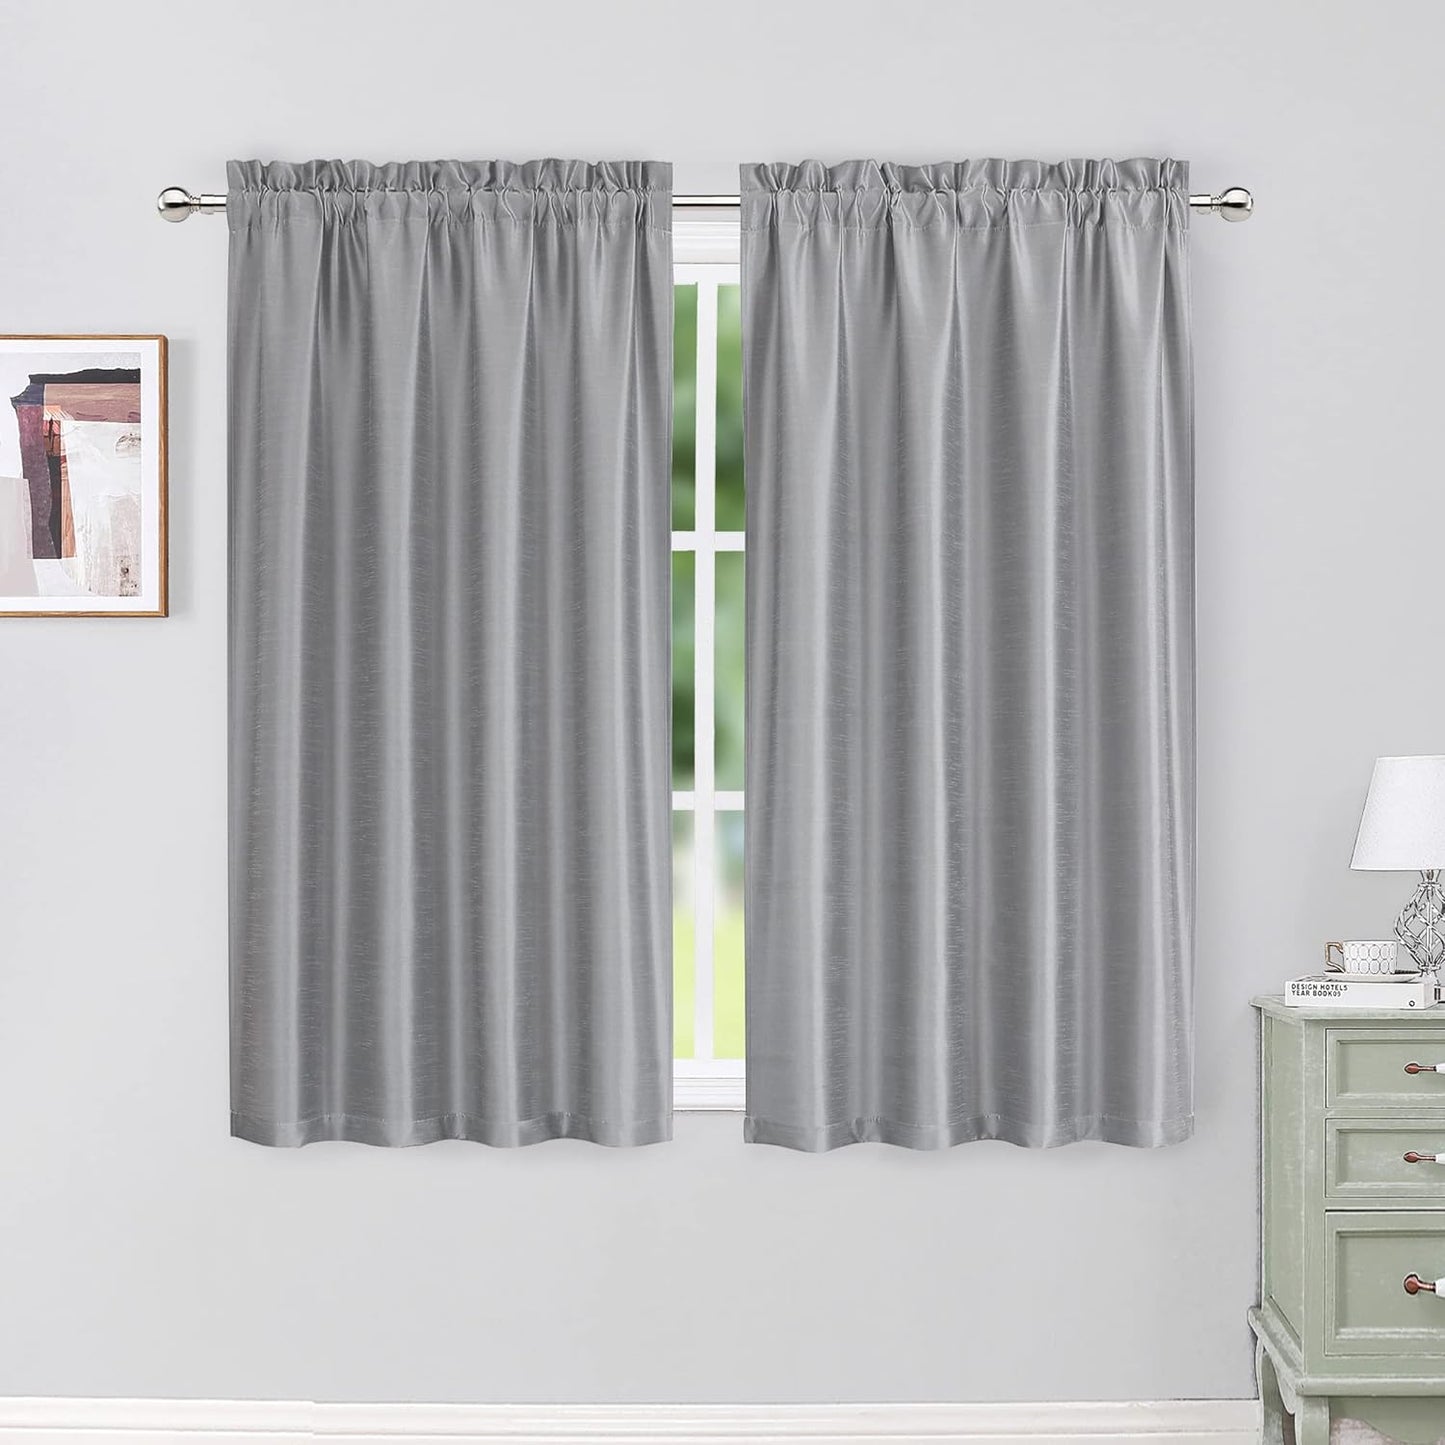 Chyhomenyc Uptown Sage Green Kitchen Curtains 45 Inch Length 2 Panels, Room Darkening Faux Silk Chic Fabric Short Window Curtains for Bedroom Living Room, Each 30Wx45L  Chyhomenyc Silver Gray 2X40"Wx63"L 